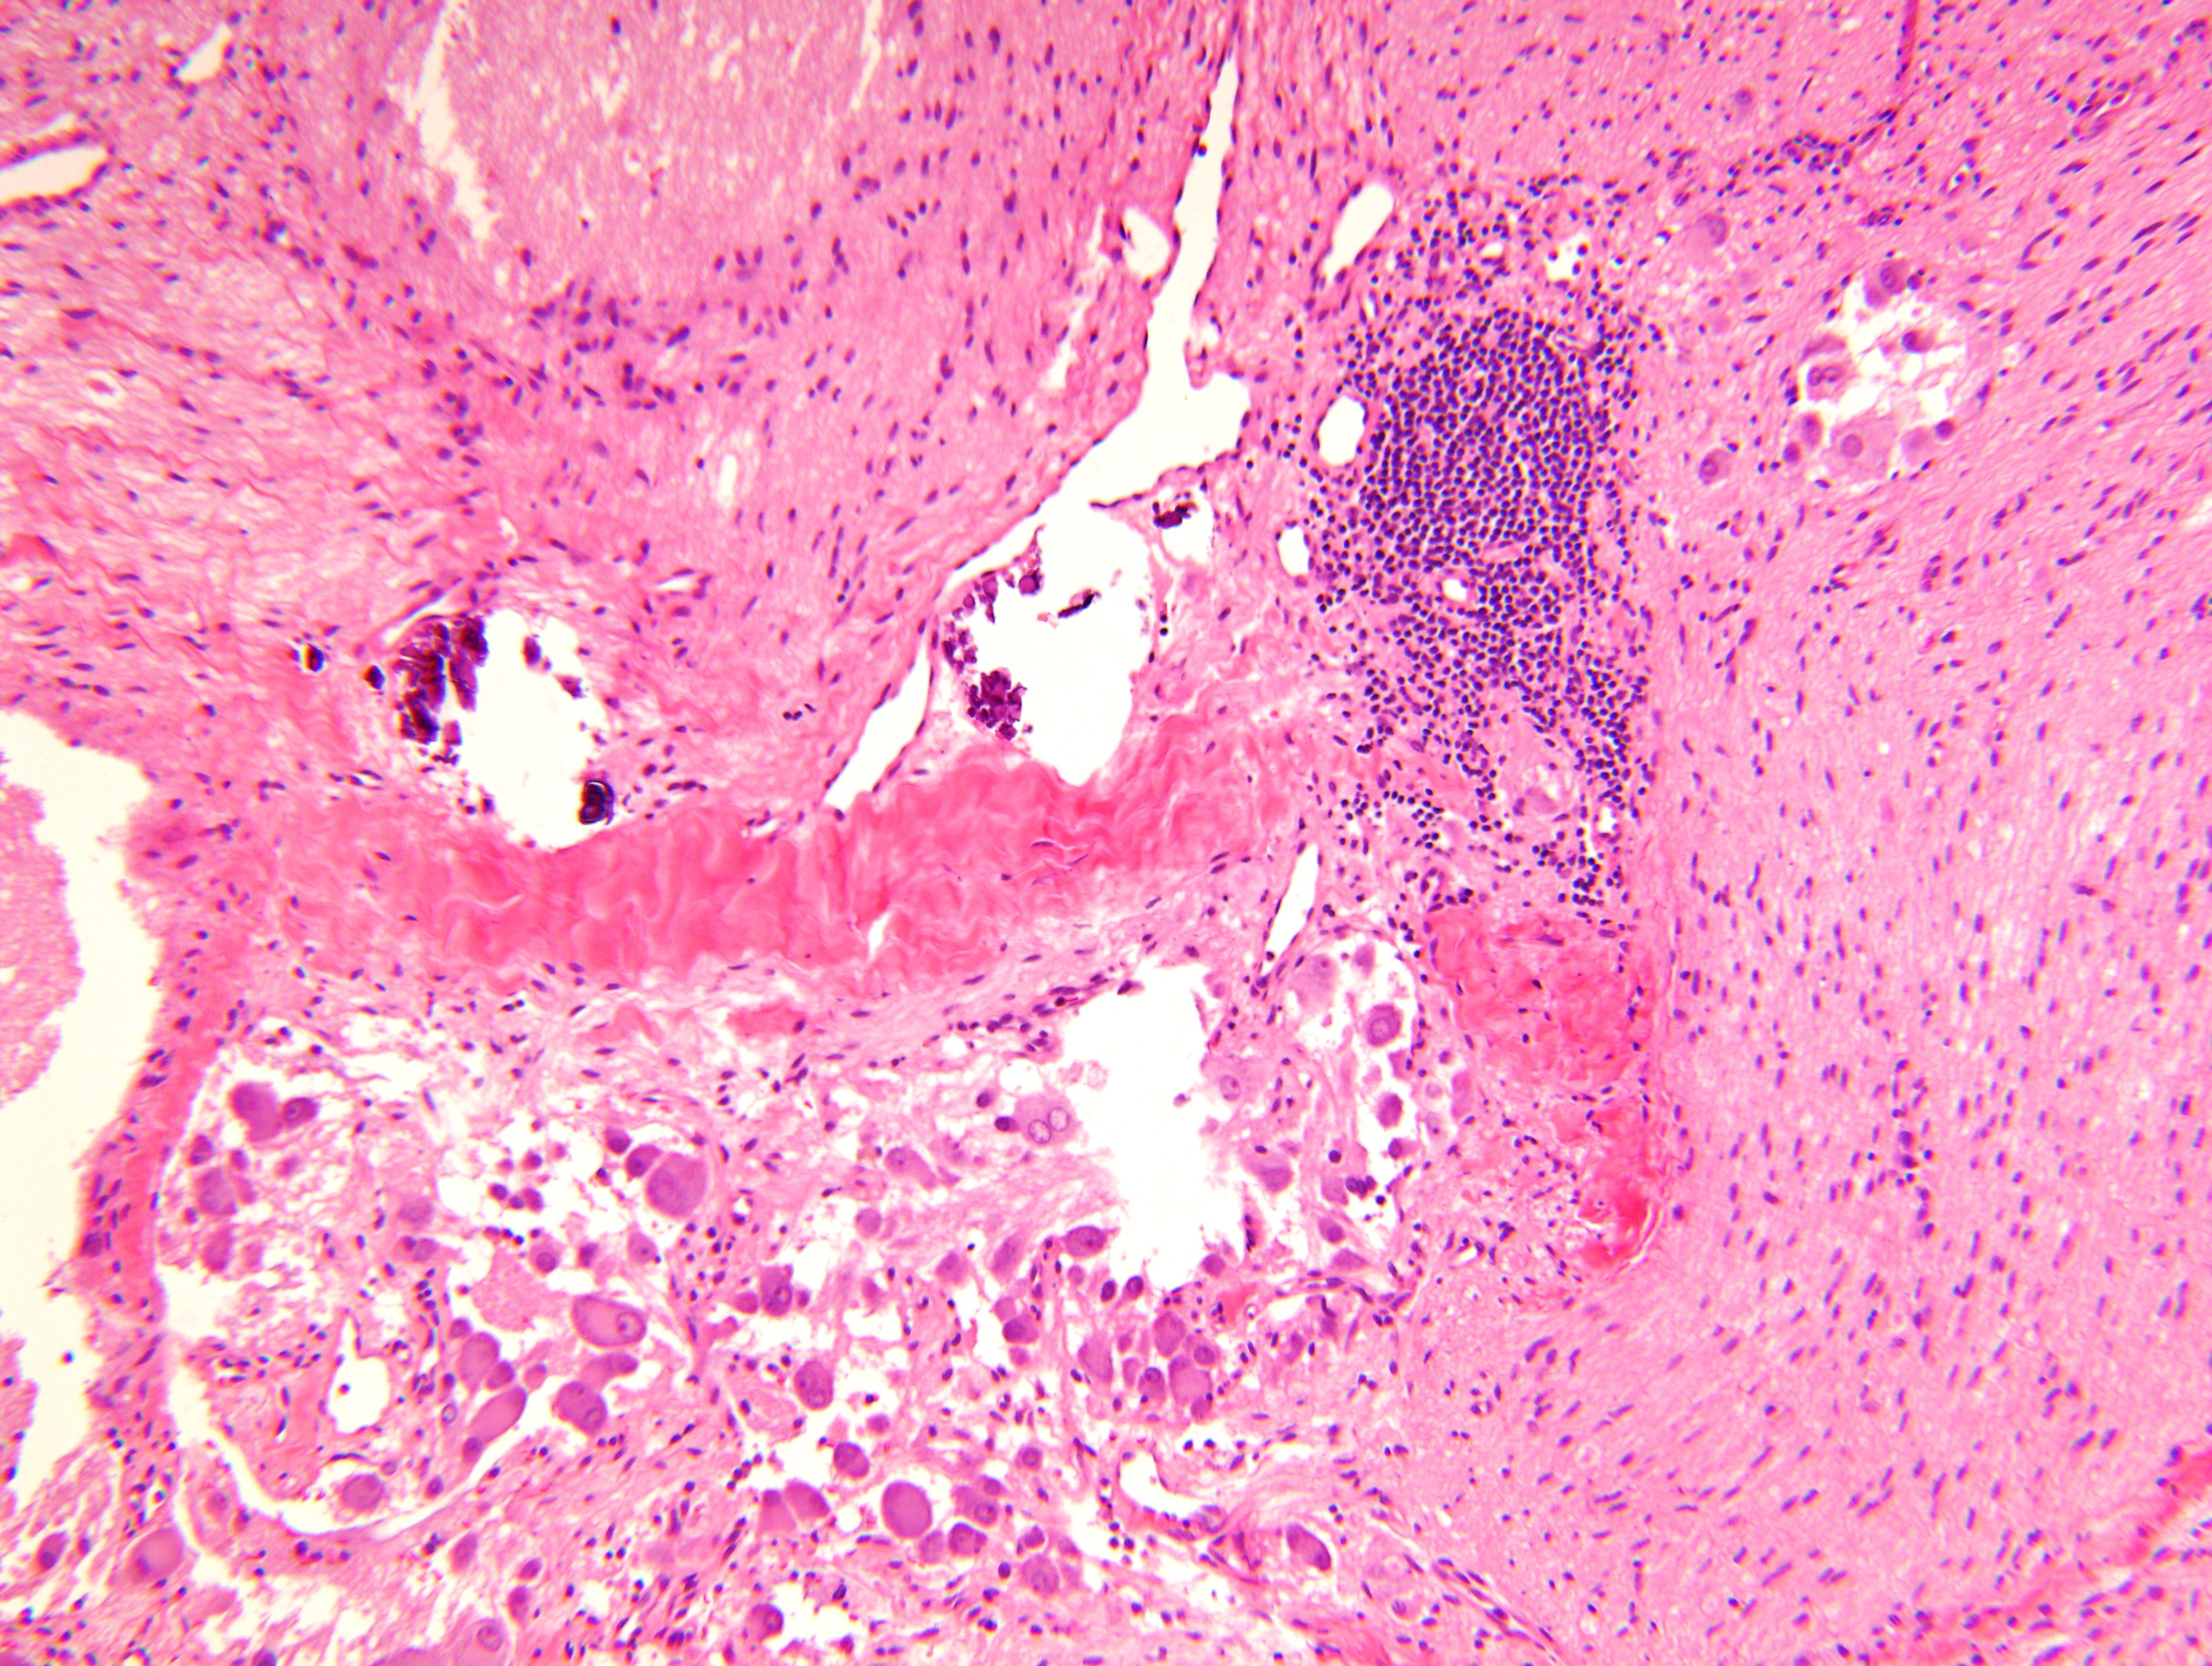 Aggregate of ganglion cells